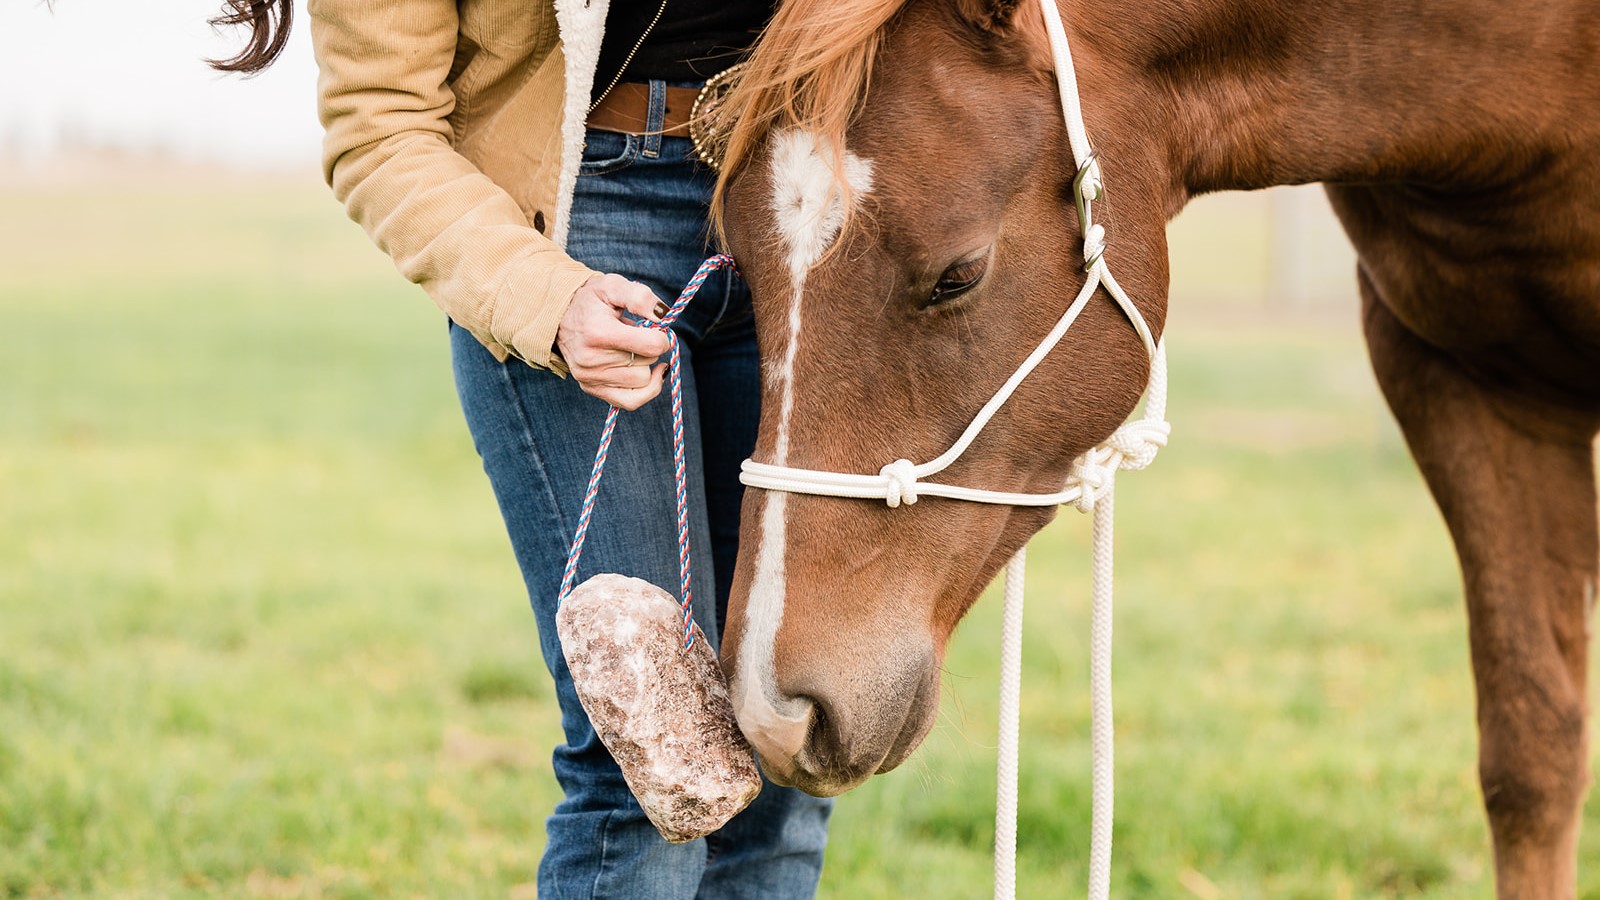 A natural mineral lick with a full spectrum of salt and electrolytes can help keep your horse from becoming dehydrated.